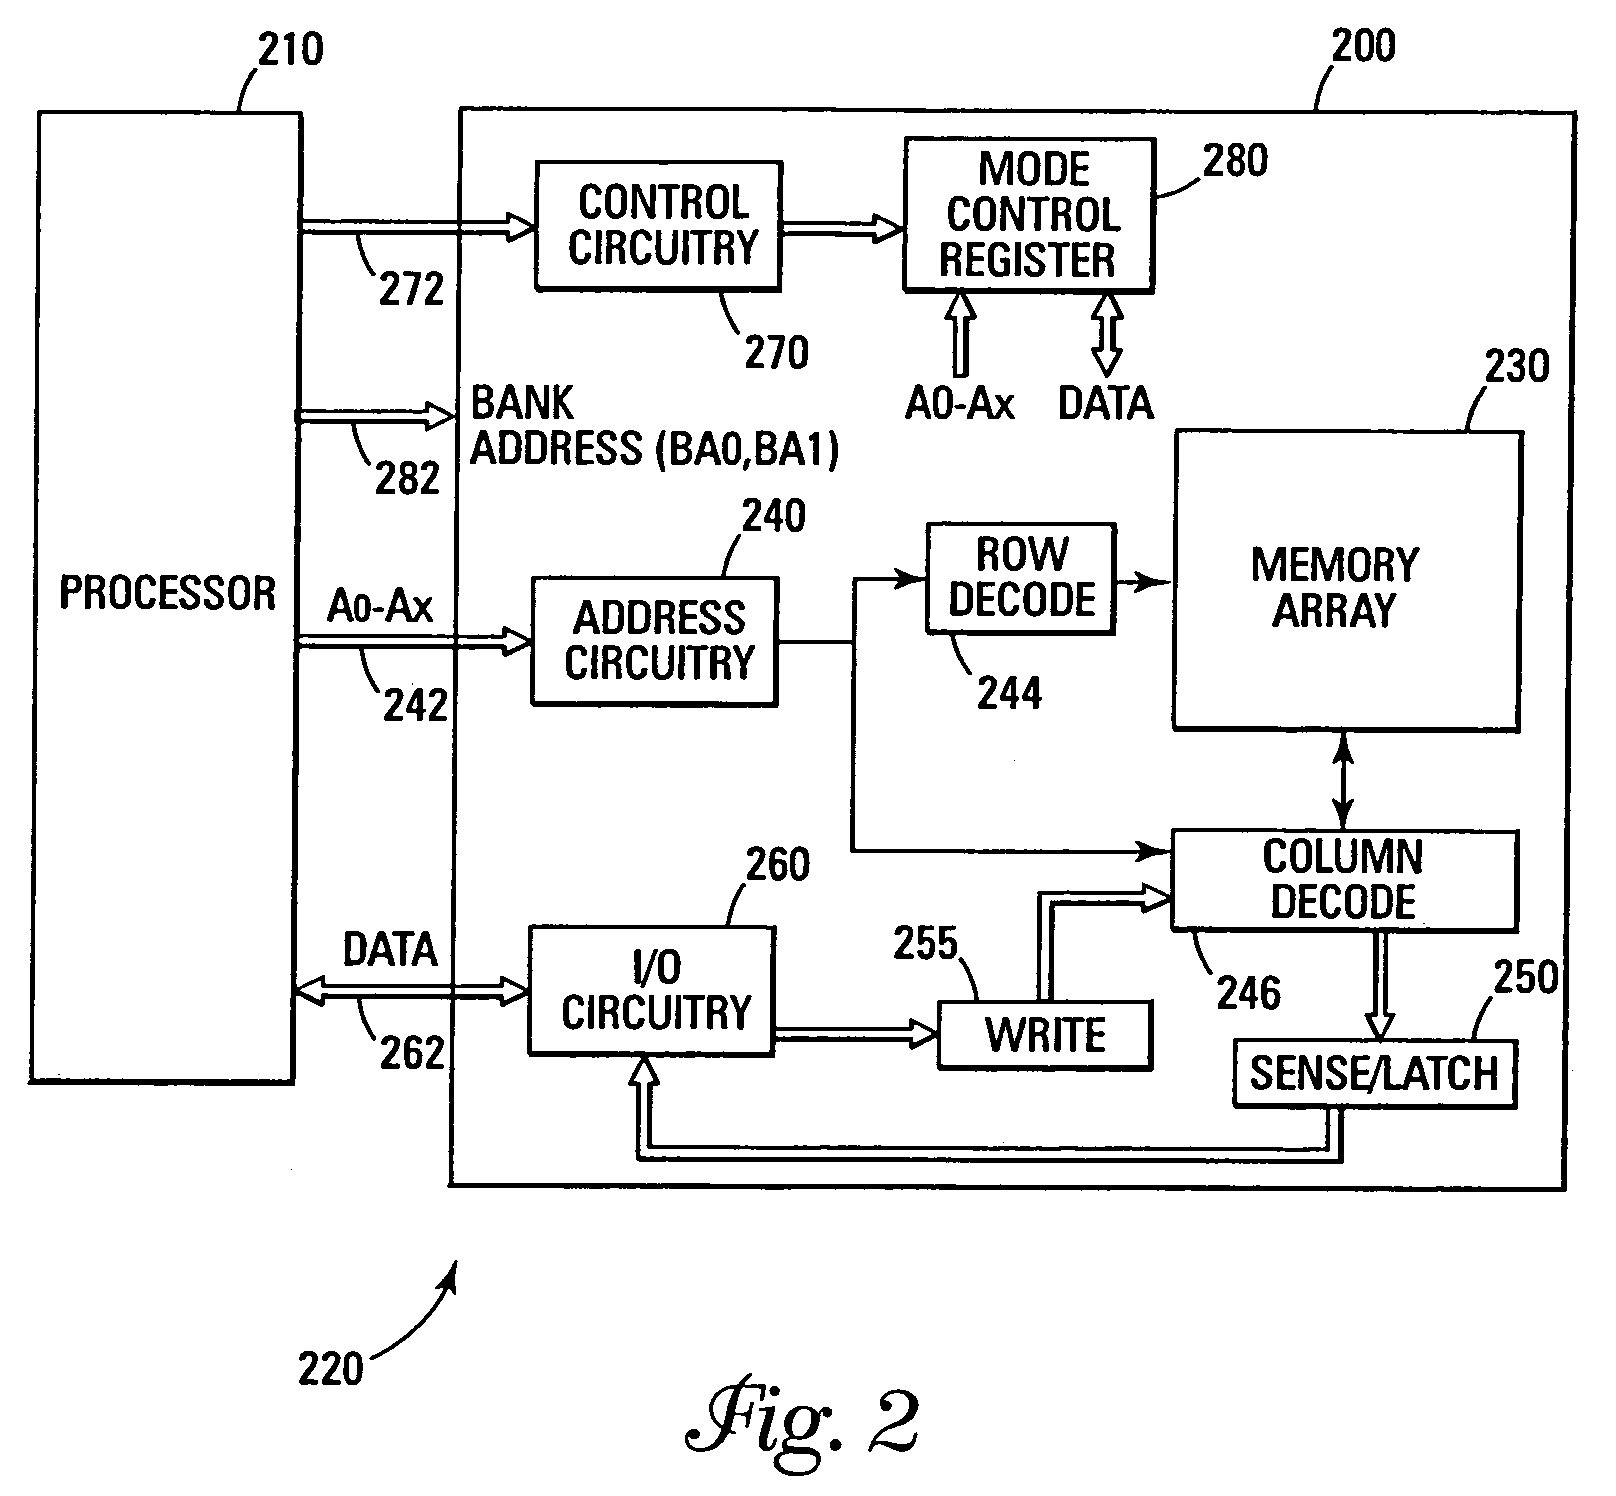 Mode selection in a flash memory device